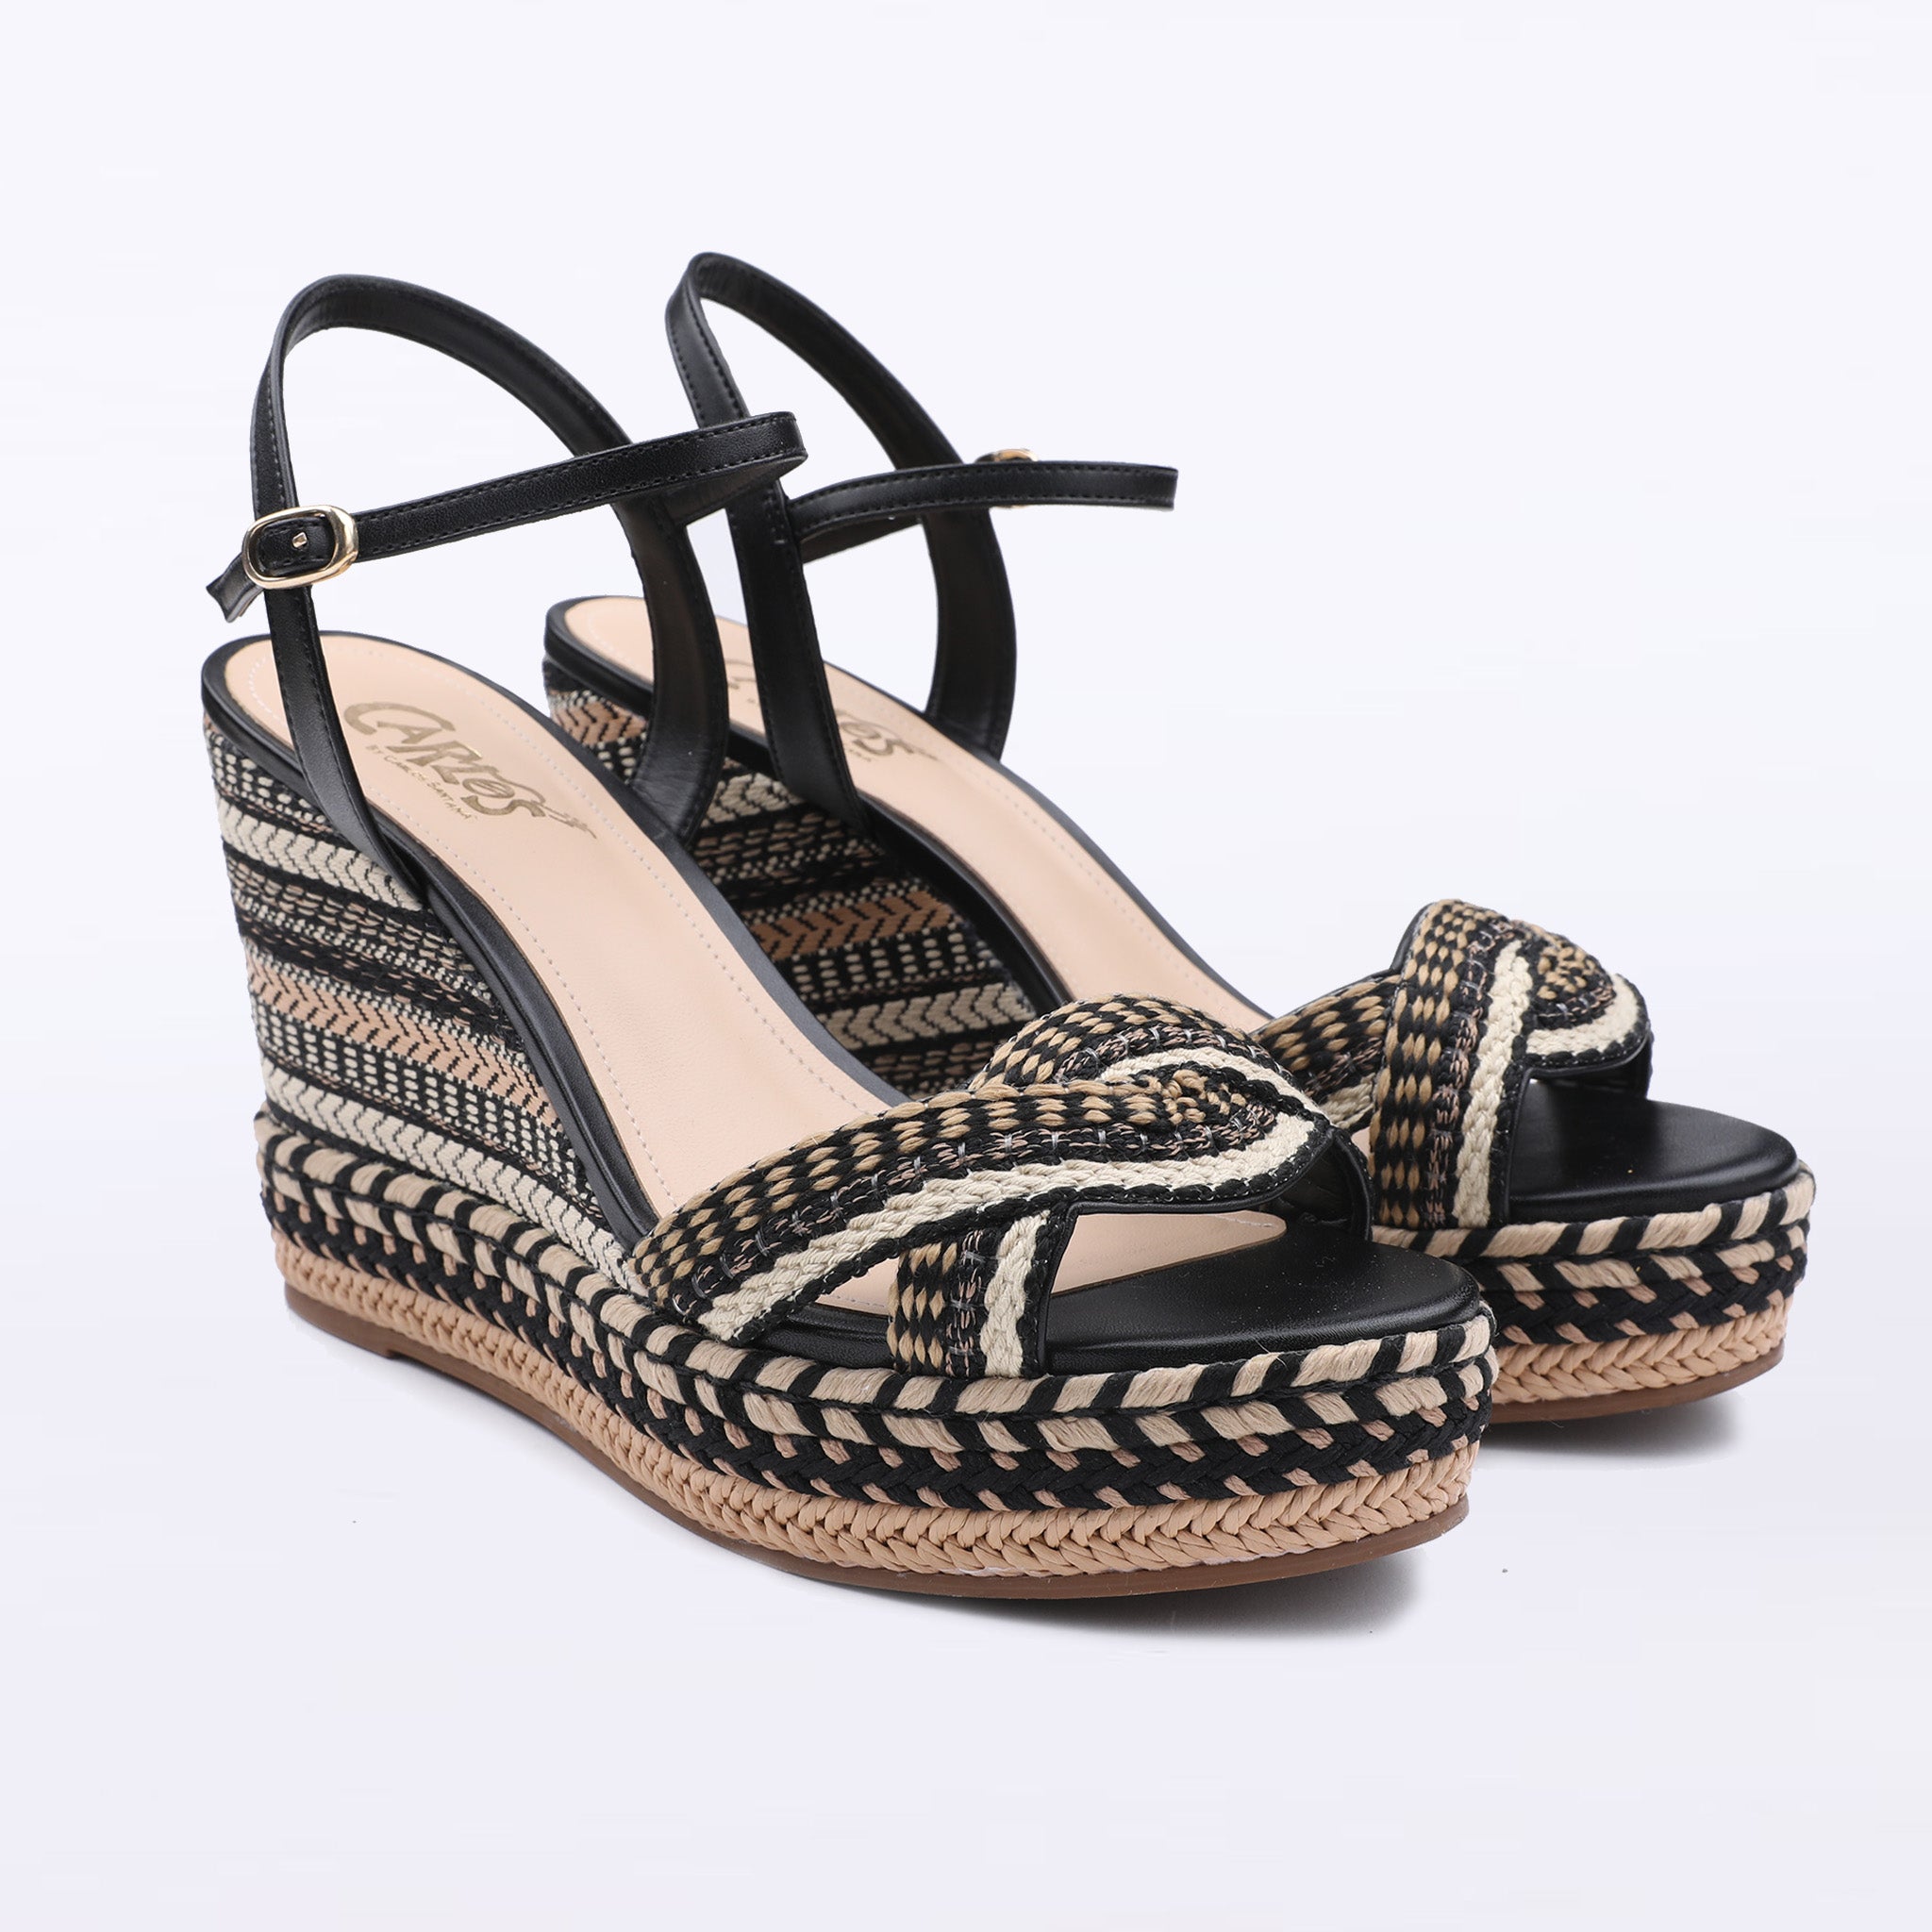 Carlos by Carlos Santana - The Women's Shoes You Love Are Back!